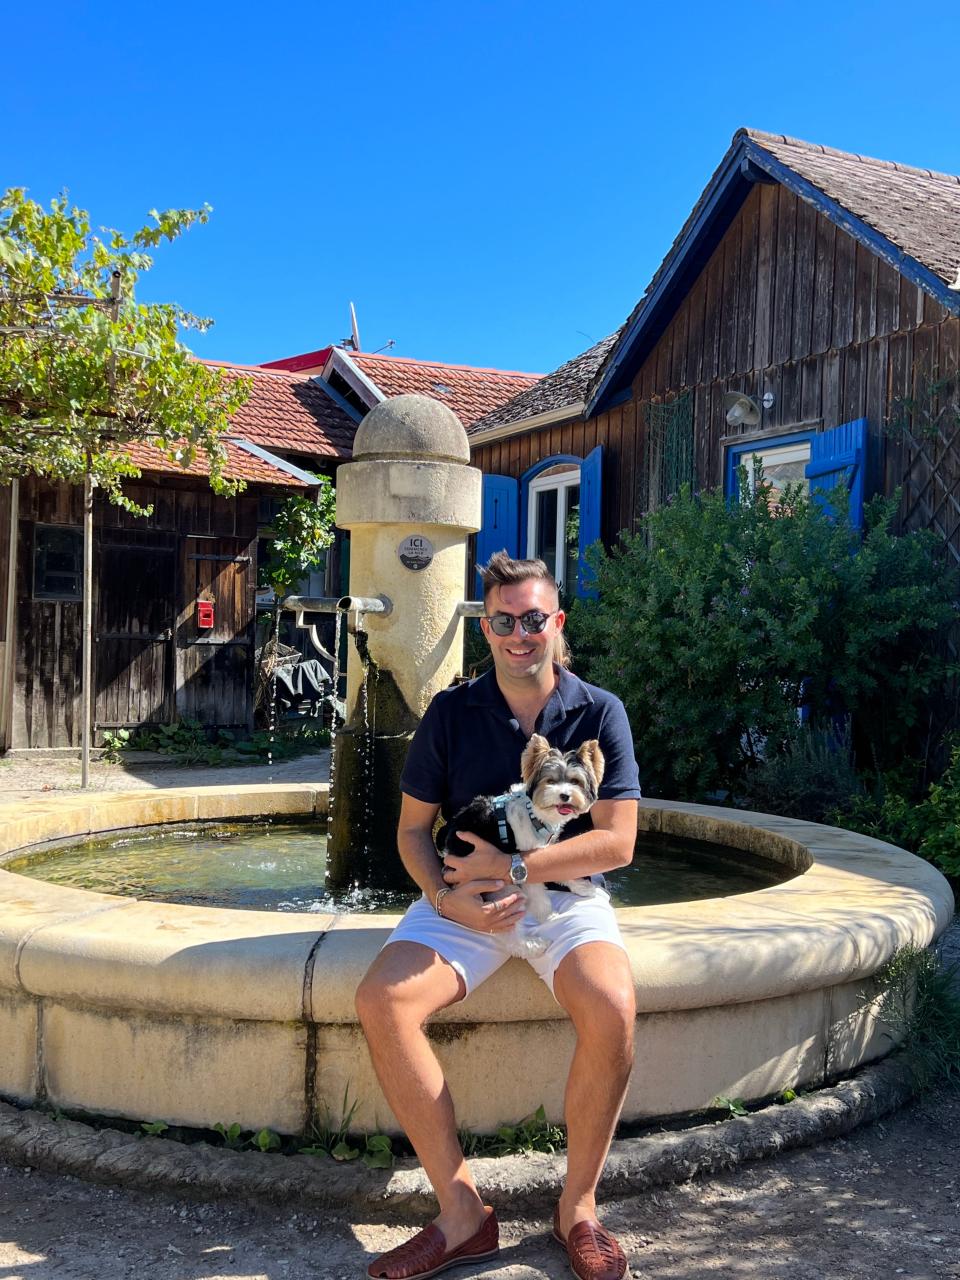 Man sitting on the edge of a fountain holding a dog and smiling in Cap-Ferret, France